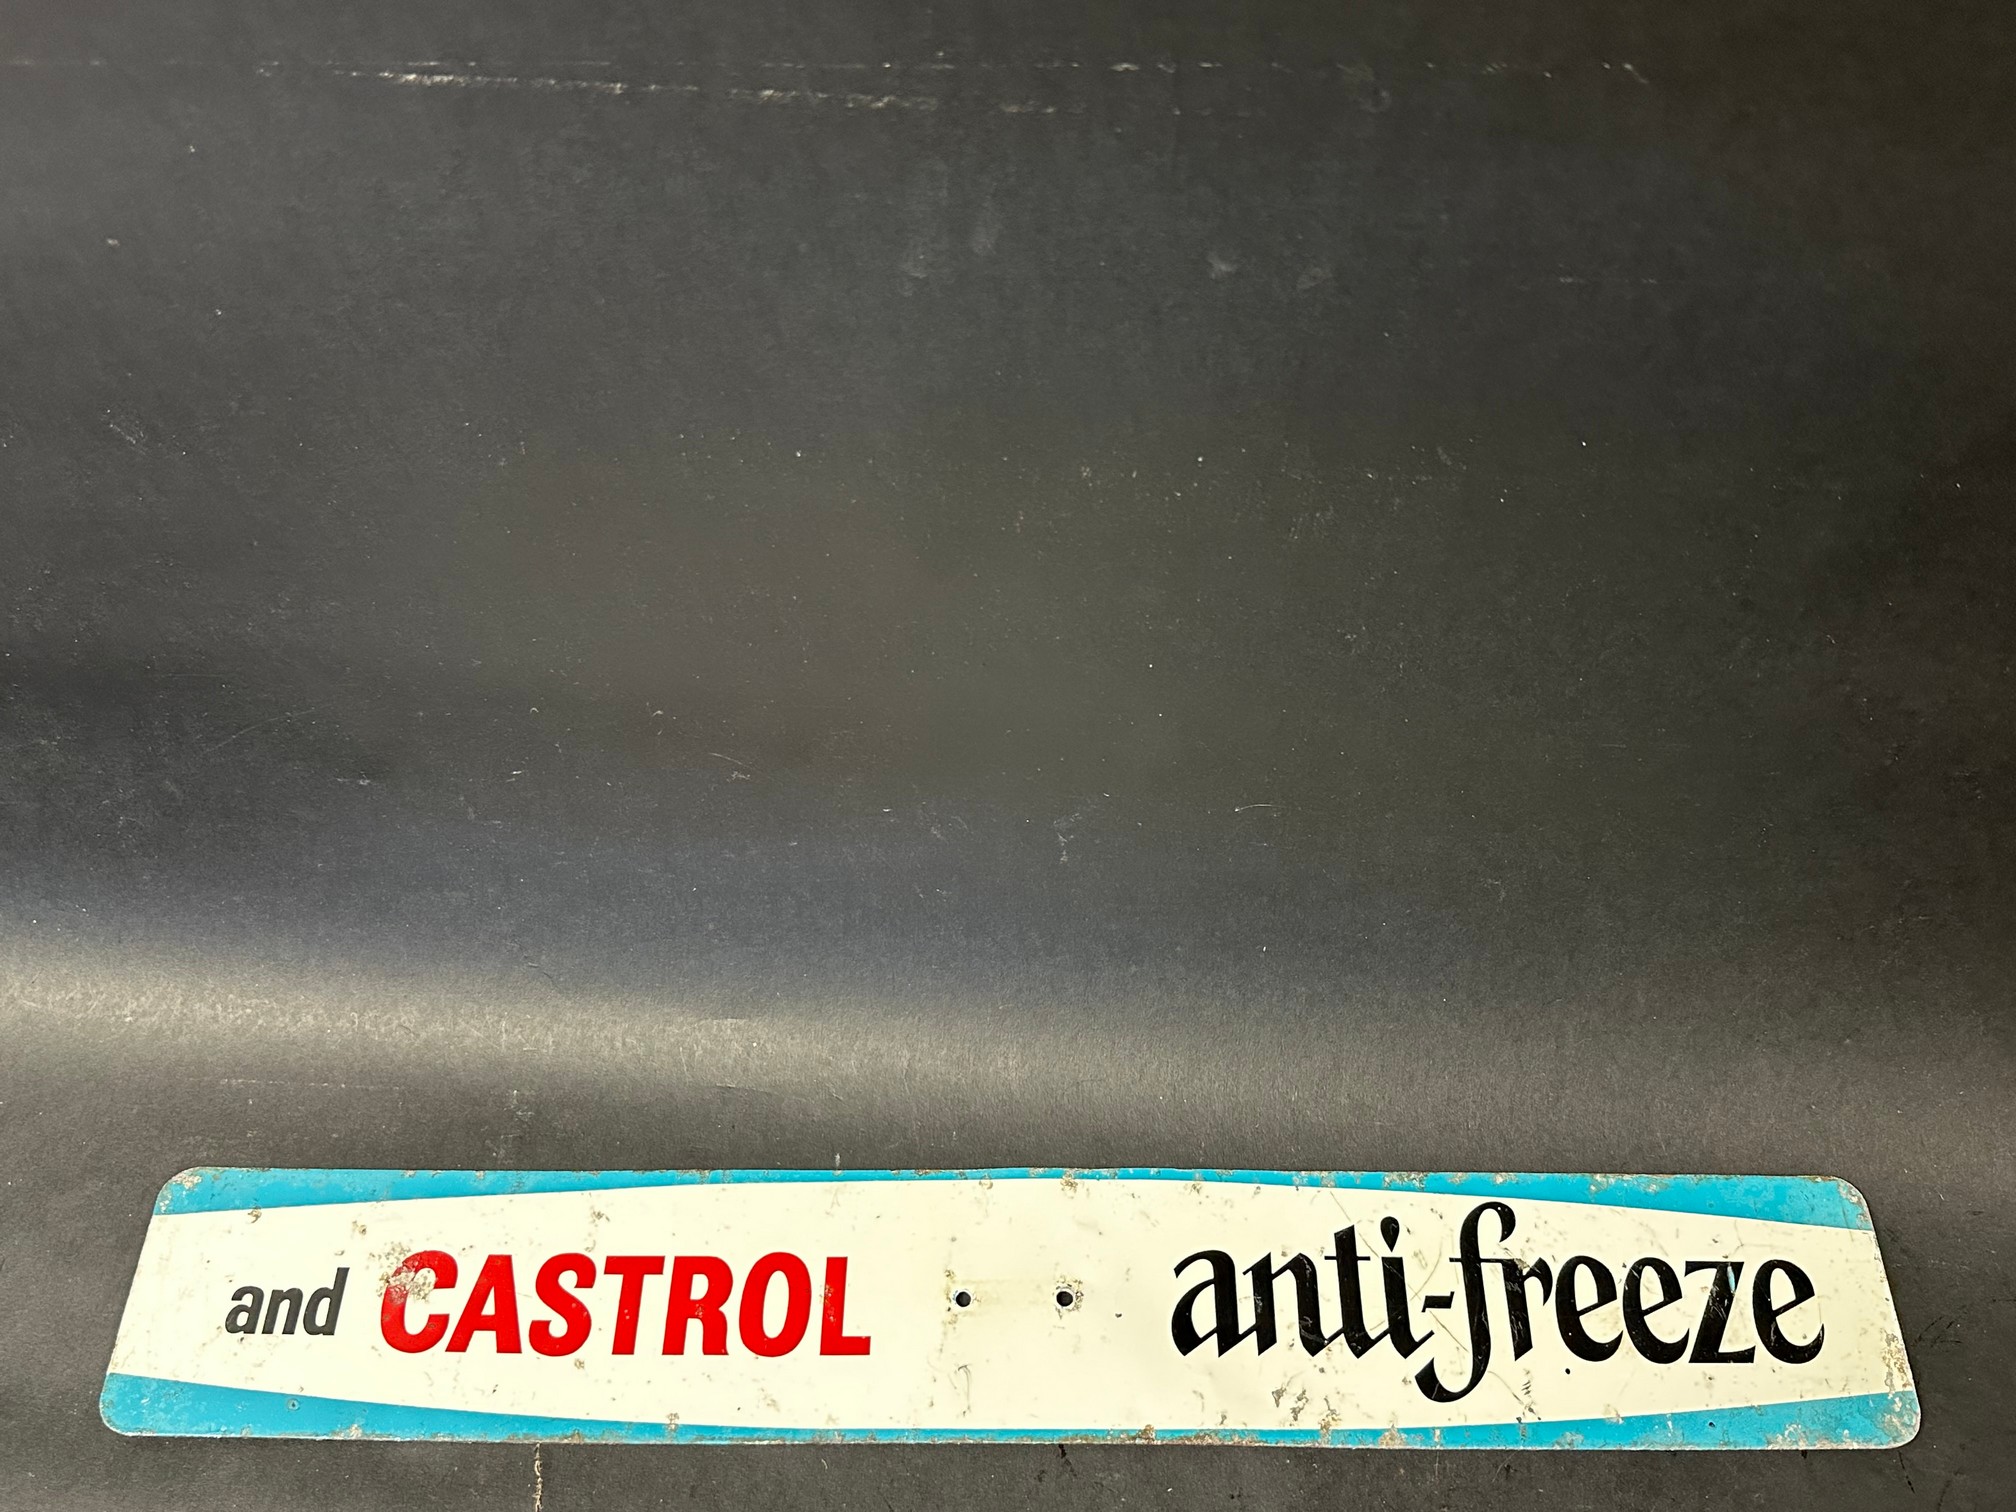 A Castrol anti-freeze double sided pediment sign.